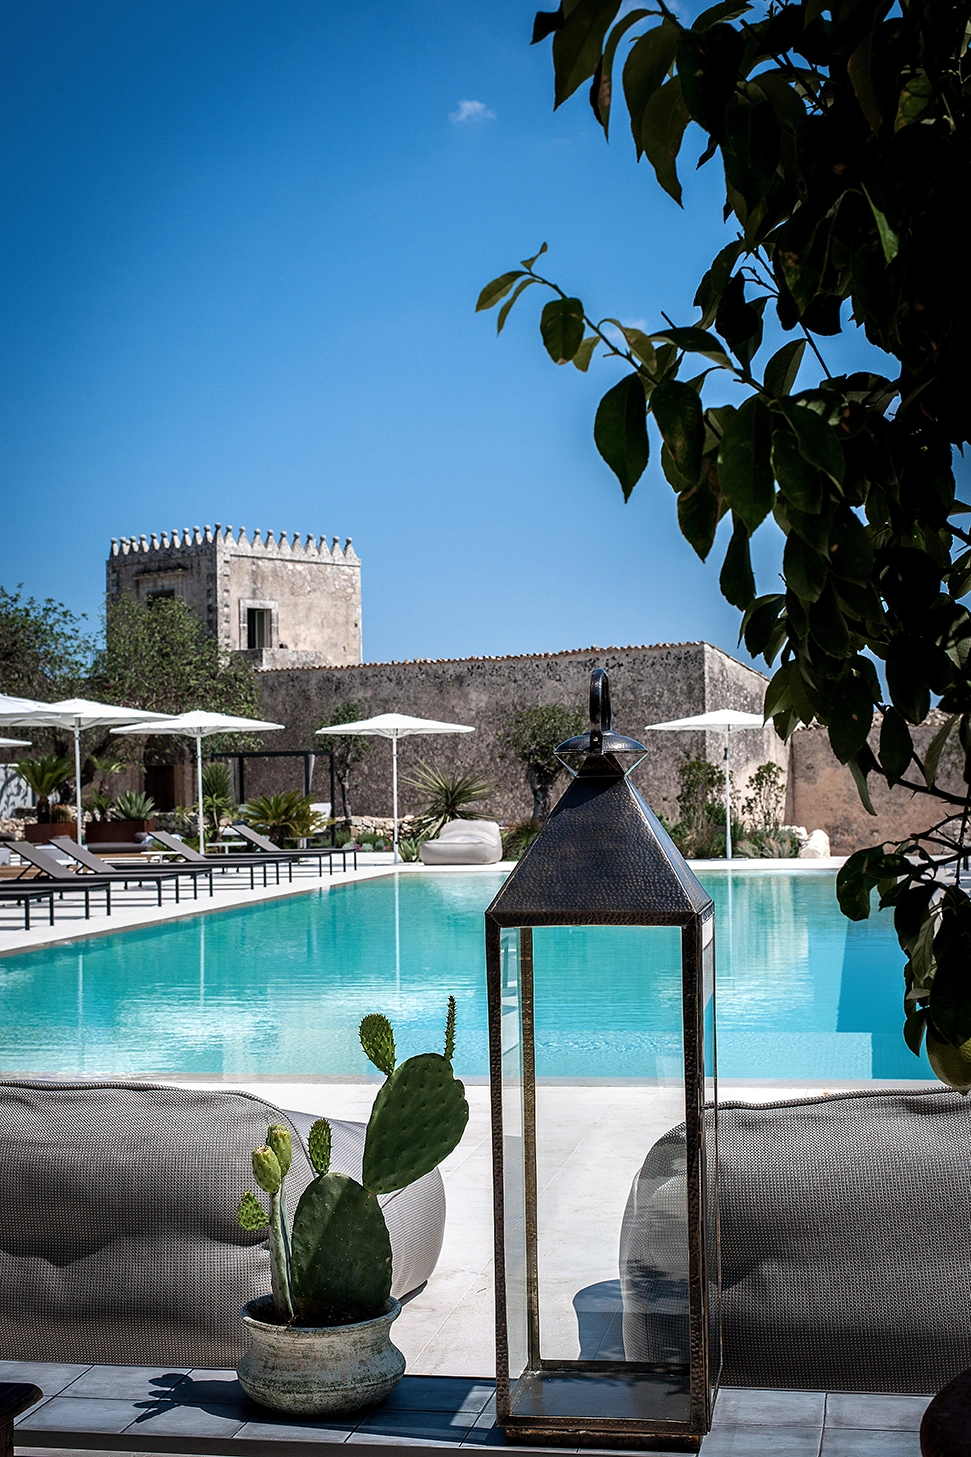 The Best Hotels In Sicily: 10 Most Luxurious Places To Stay